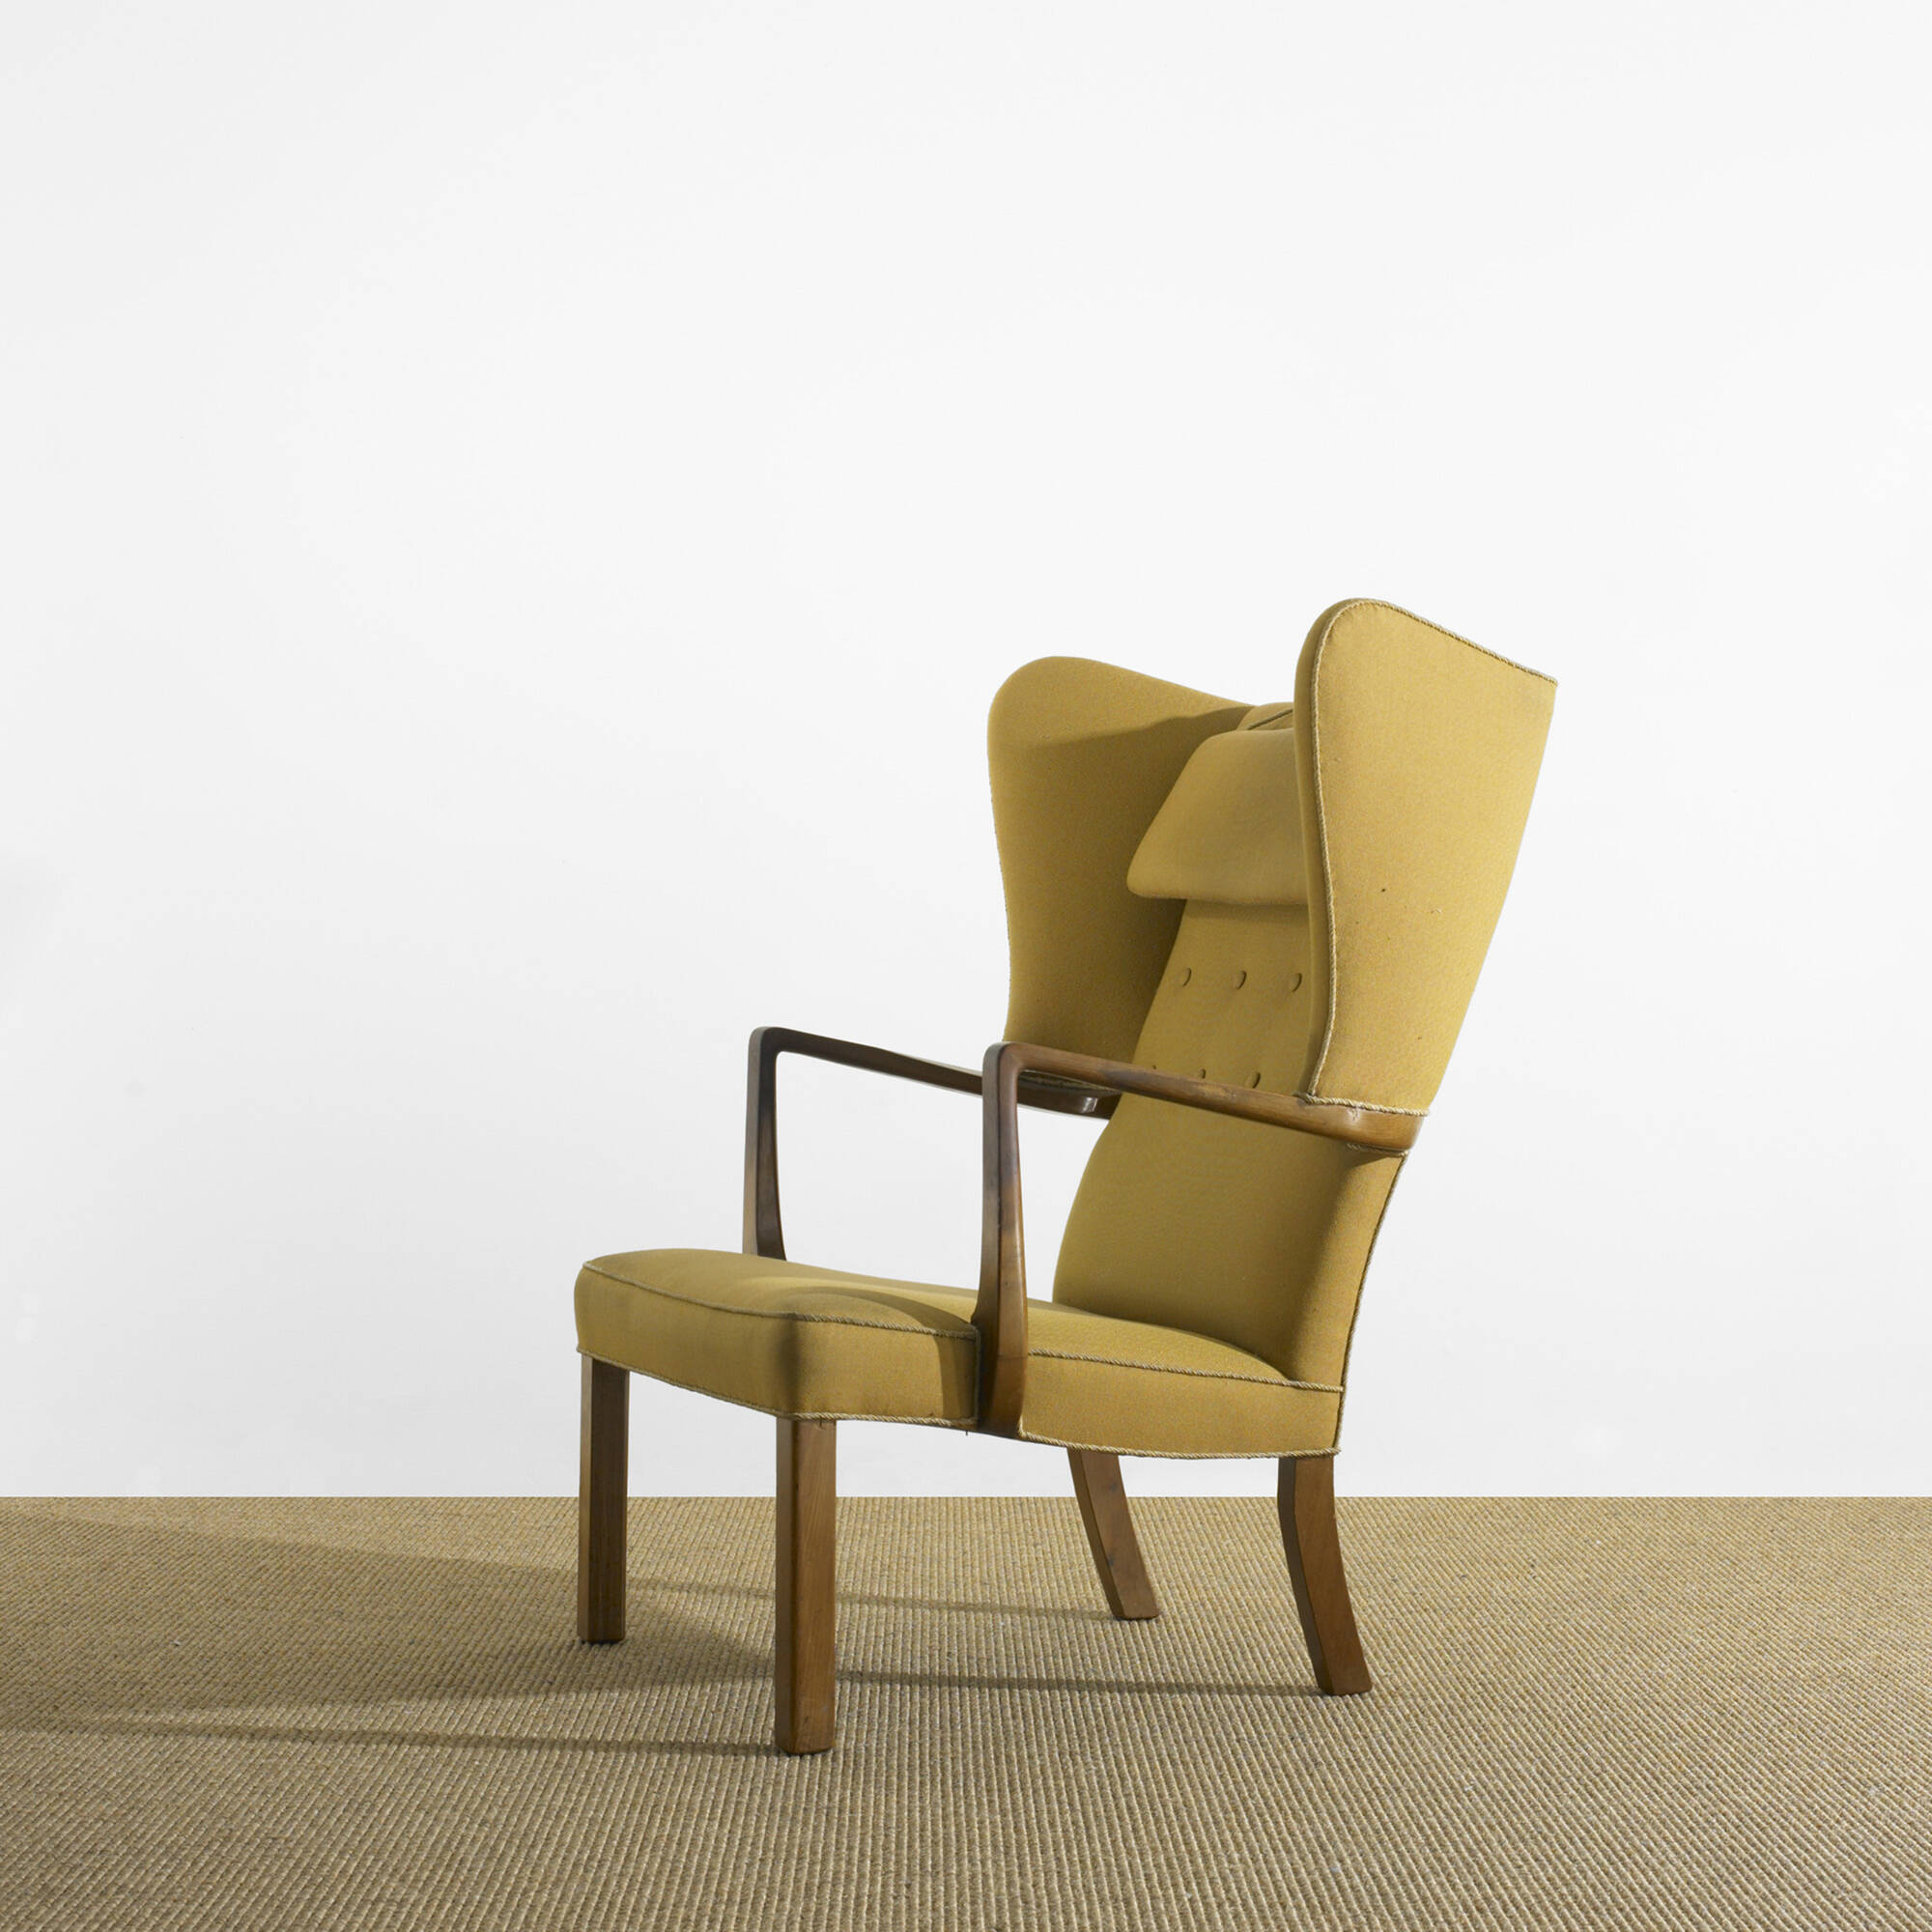 168: JACOB KJÆR, lounge chair < Scandinavian Design, 12 May 2011 < Auctions  | Wright: Auctions of Art and Design